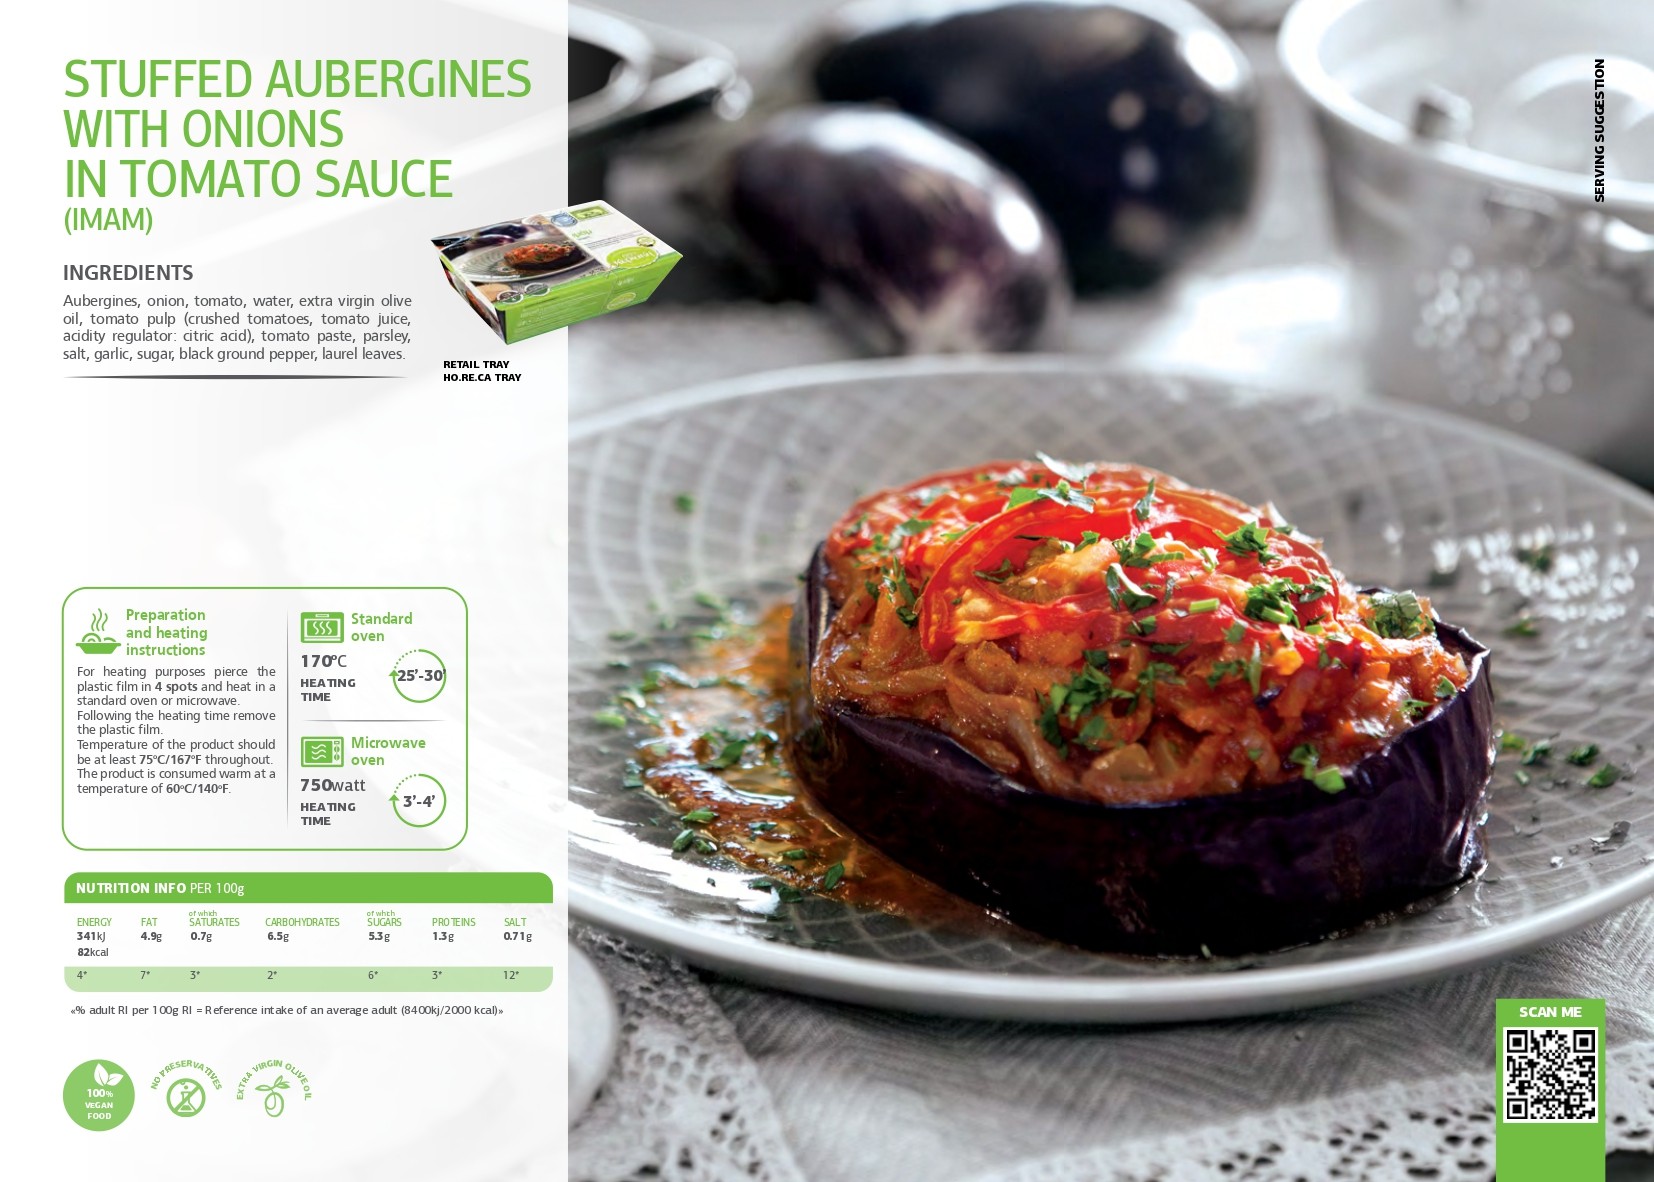 SK - Stuffed aubergines with onions in tomato sauce (Imam) pdf image